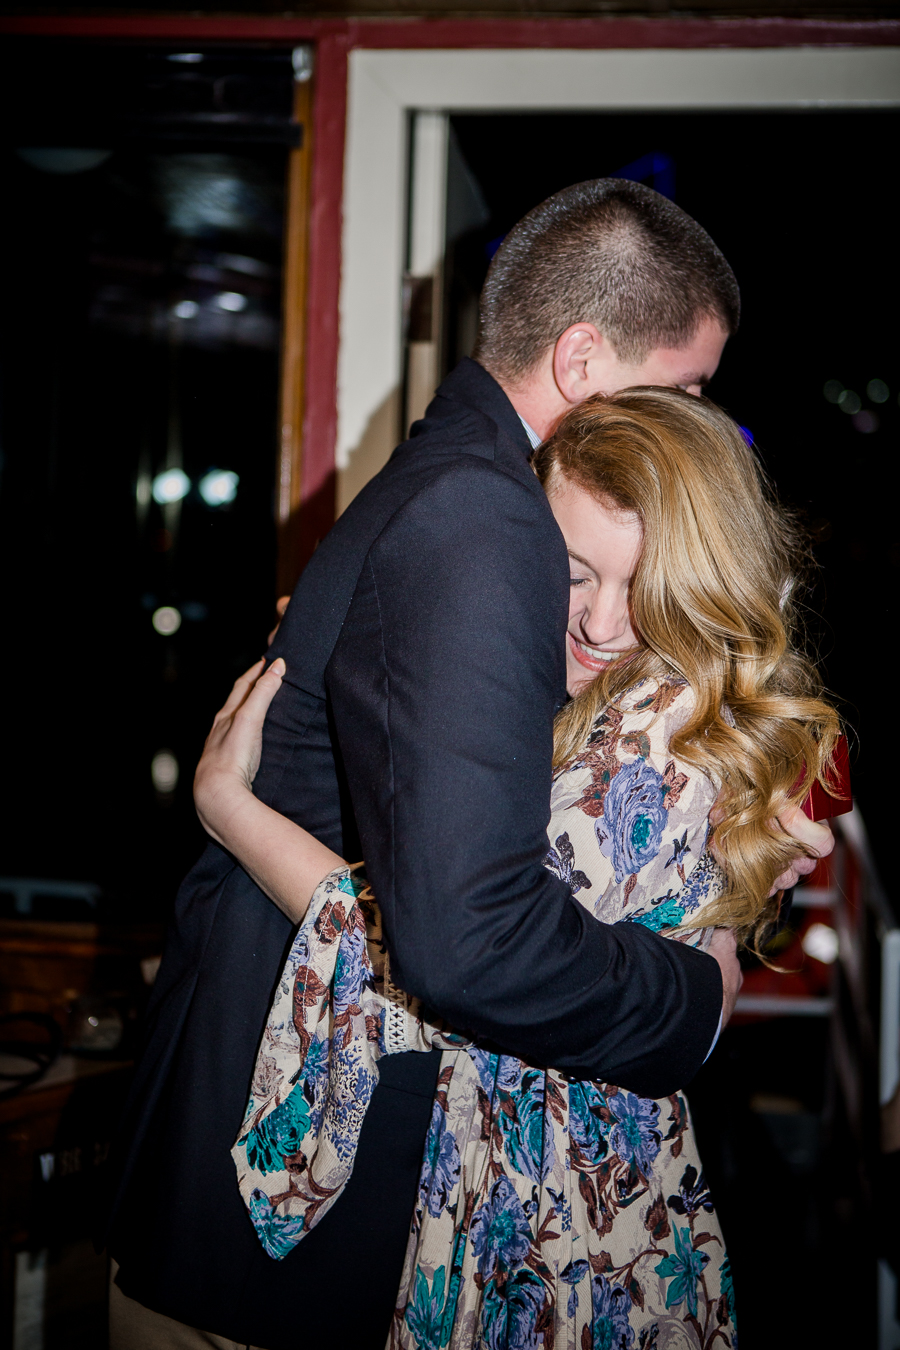 Hugging her after proposing engagement photo by Knoxville Wedding Photographer, Amanda May Photos.